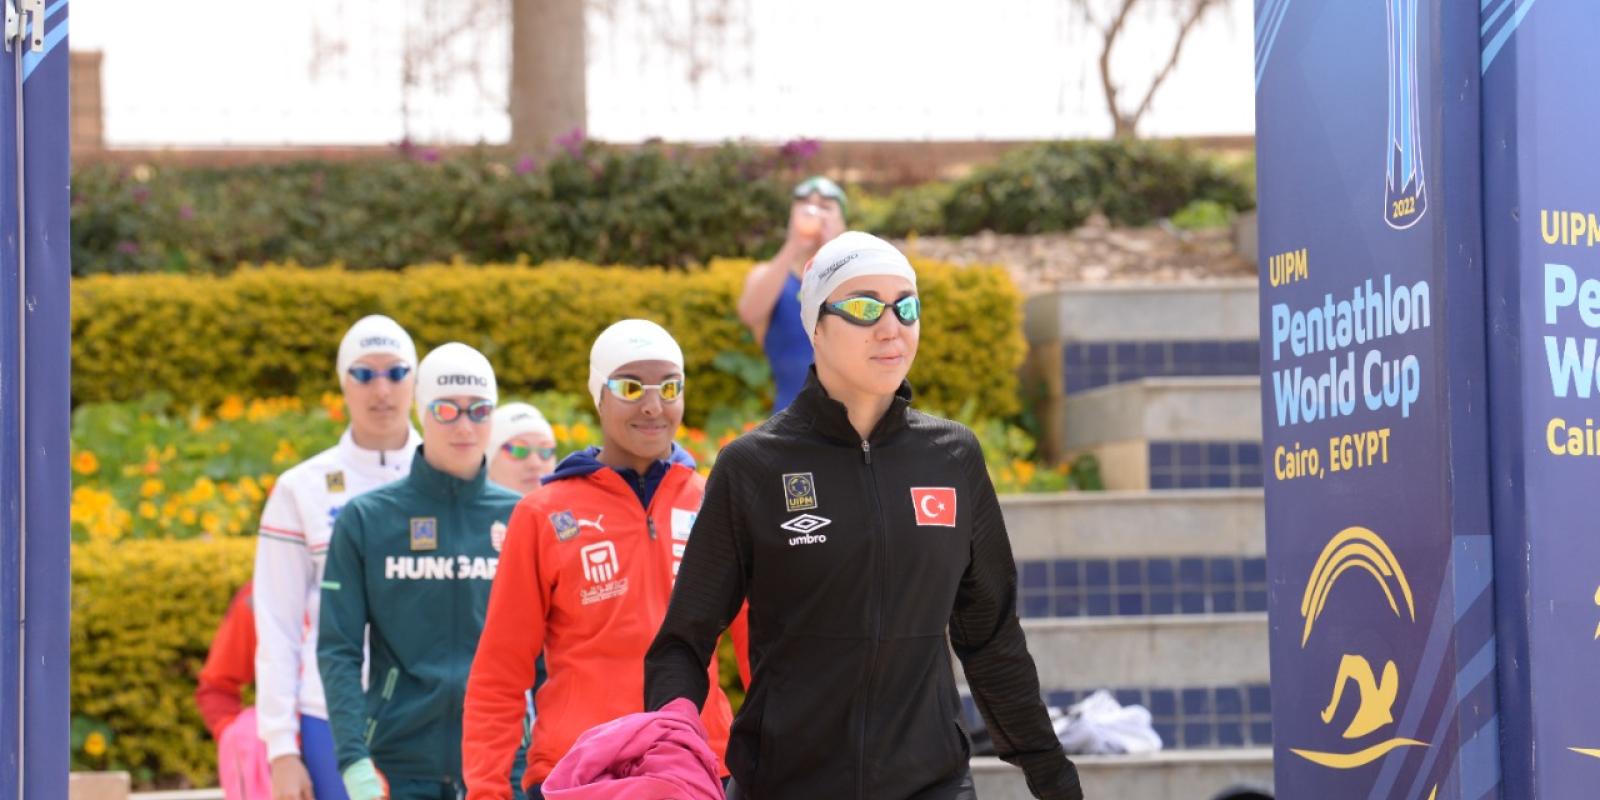 Swimmers lining up for the race